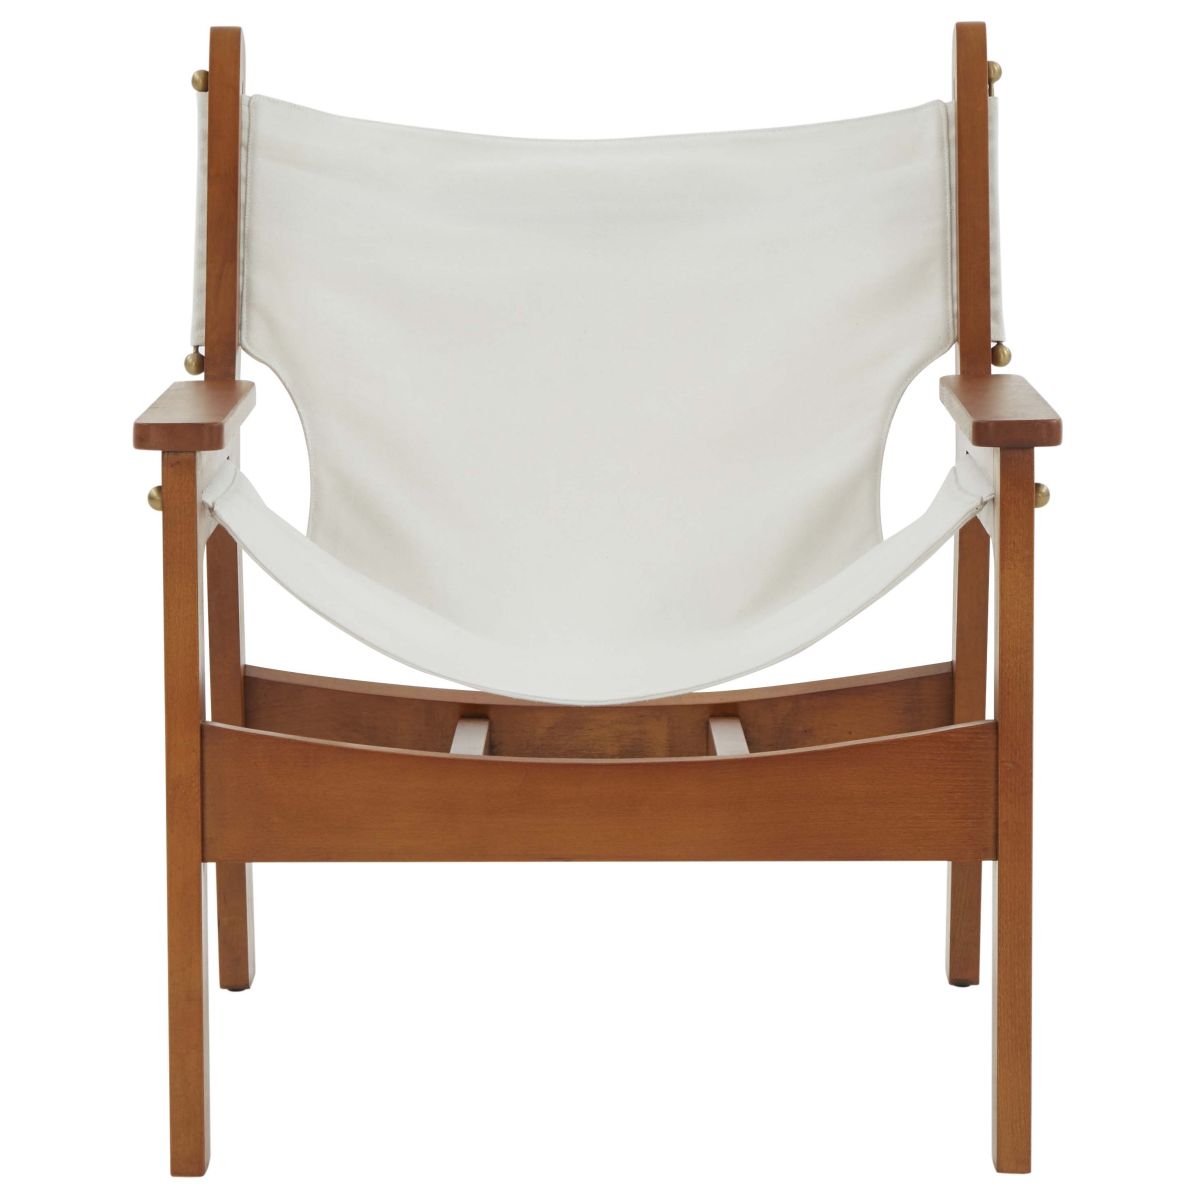 Safavieh Couture Thomson Sling Accent Chair - White / Light Brown